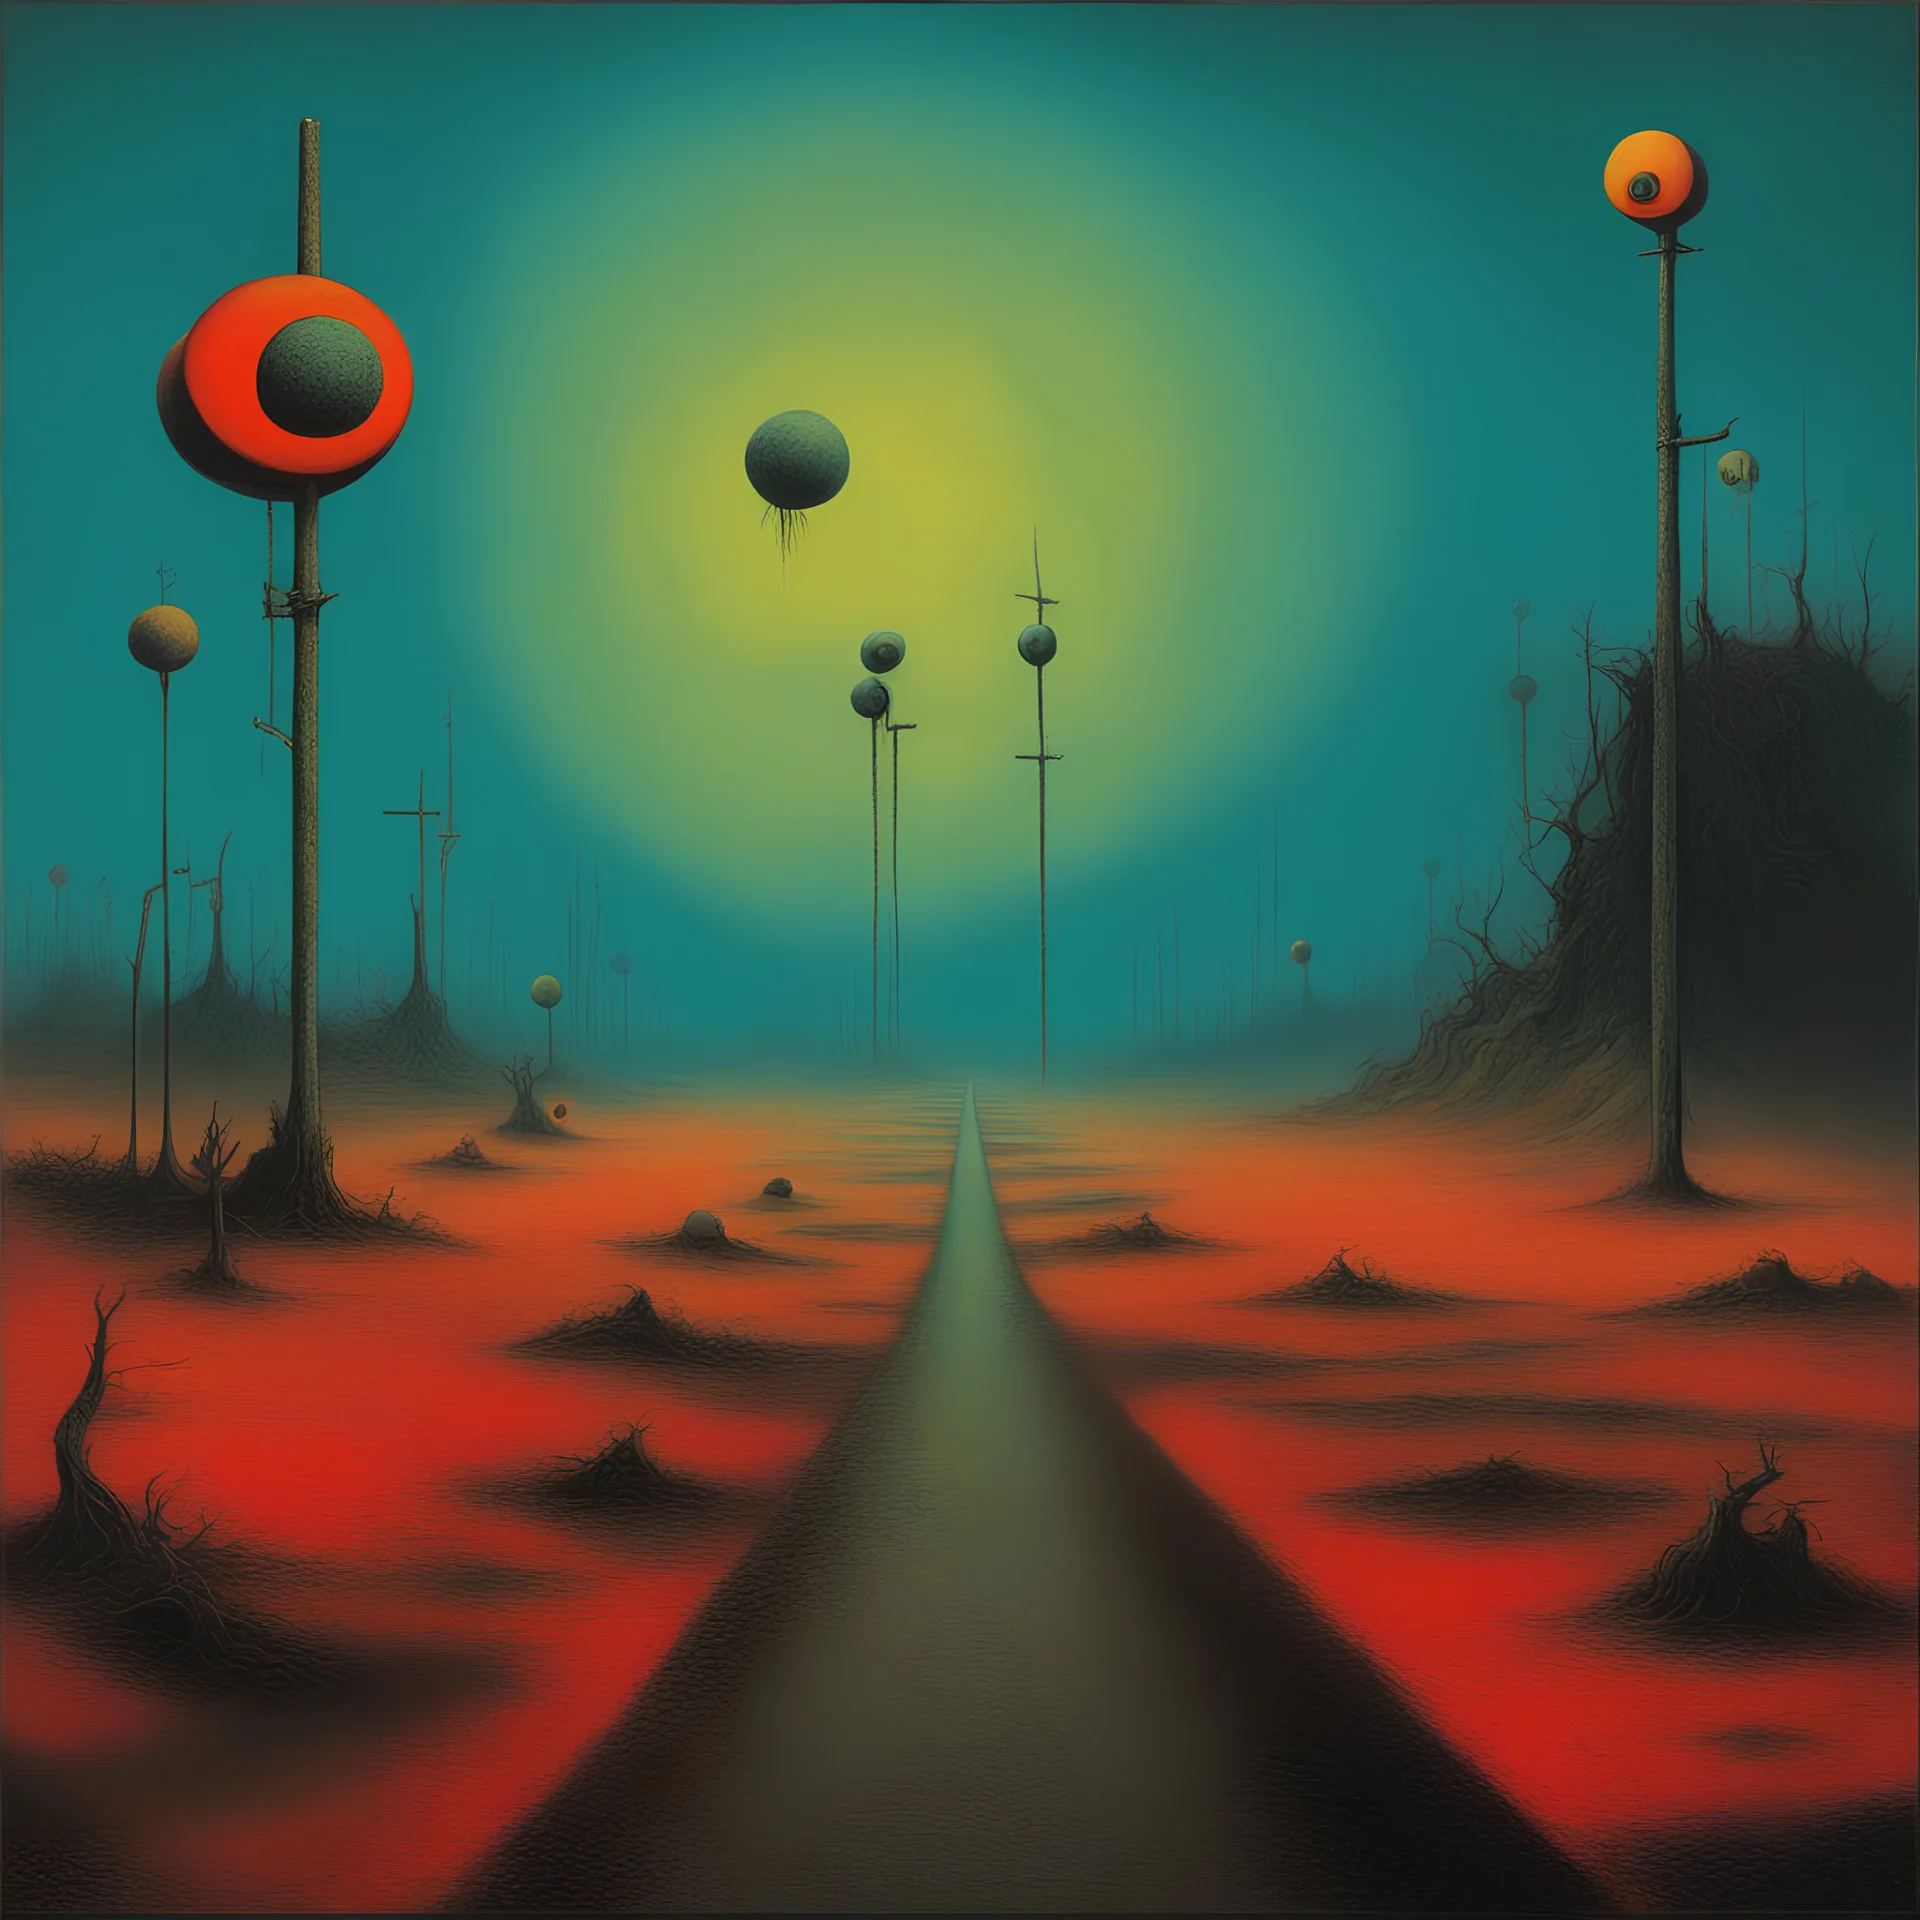 Style by Max Ernst and Joan Miro and Zdzislaw Beksinski and Wes Benscoter, bright colors, weirdcore, paradoxical sinister road crossing signs, depth of field, unsettling, asymmetric abstractions, surreal masterpiece, juxtaposition of the uncanny and the banal, creepy, never before seen art of beyond